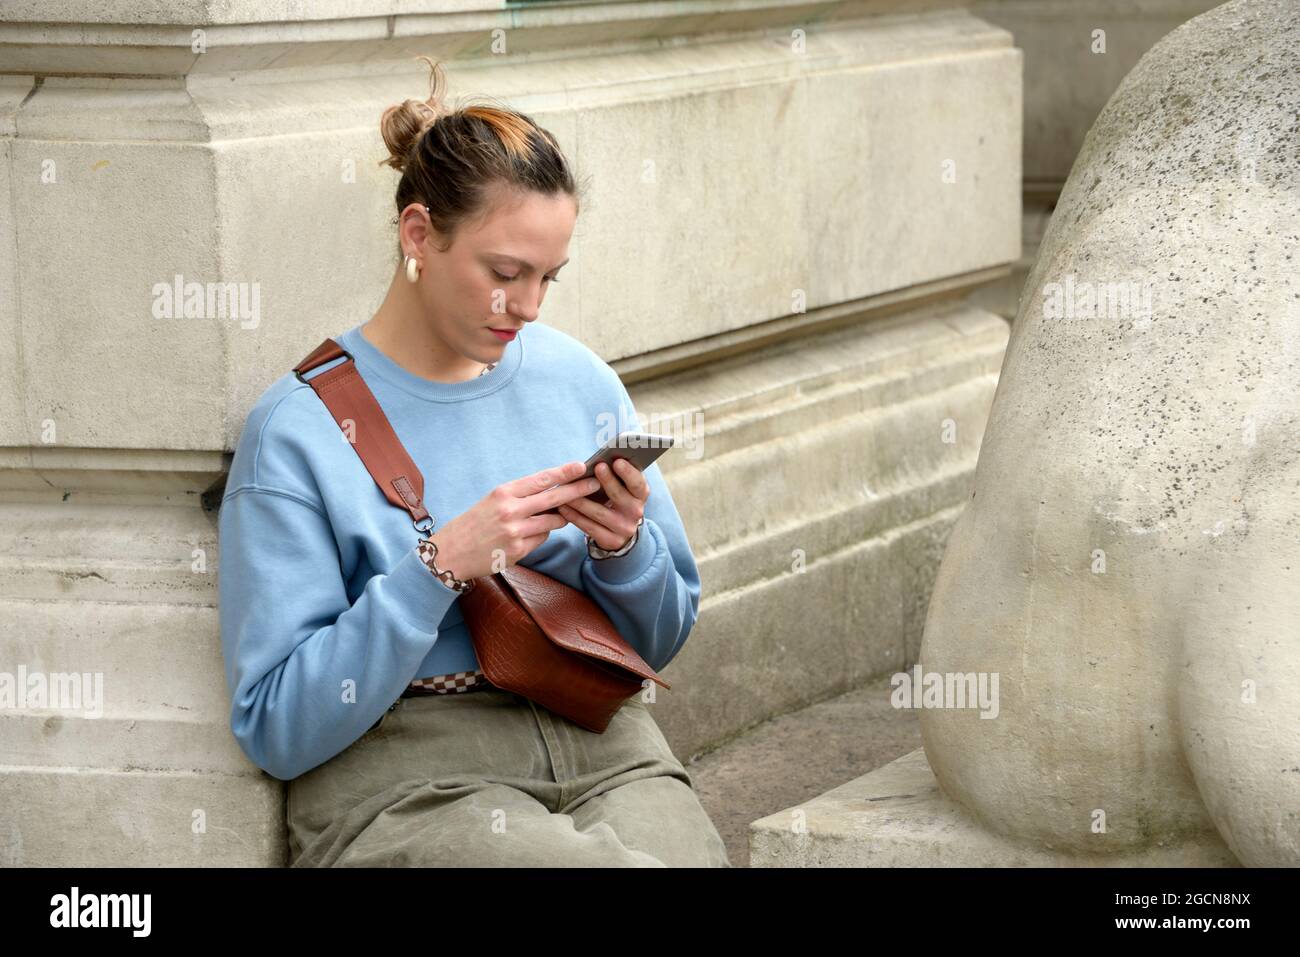 Young lady in pale blue top, studying mobile phone Stock Photo